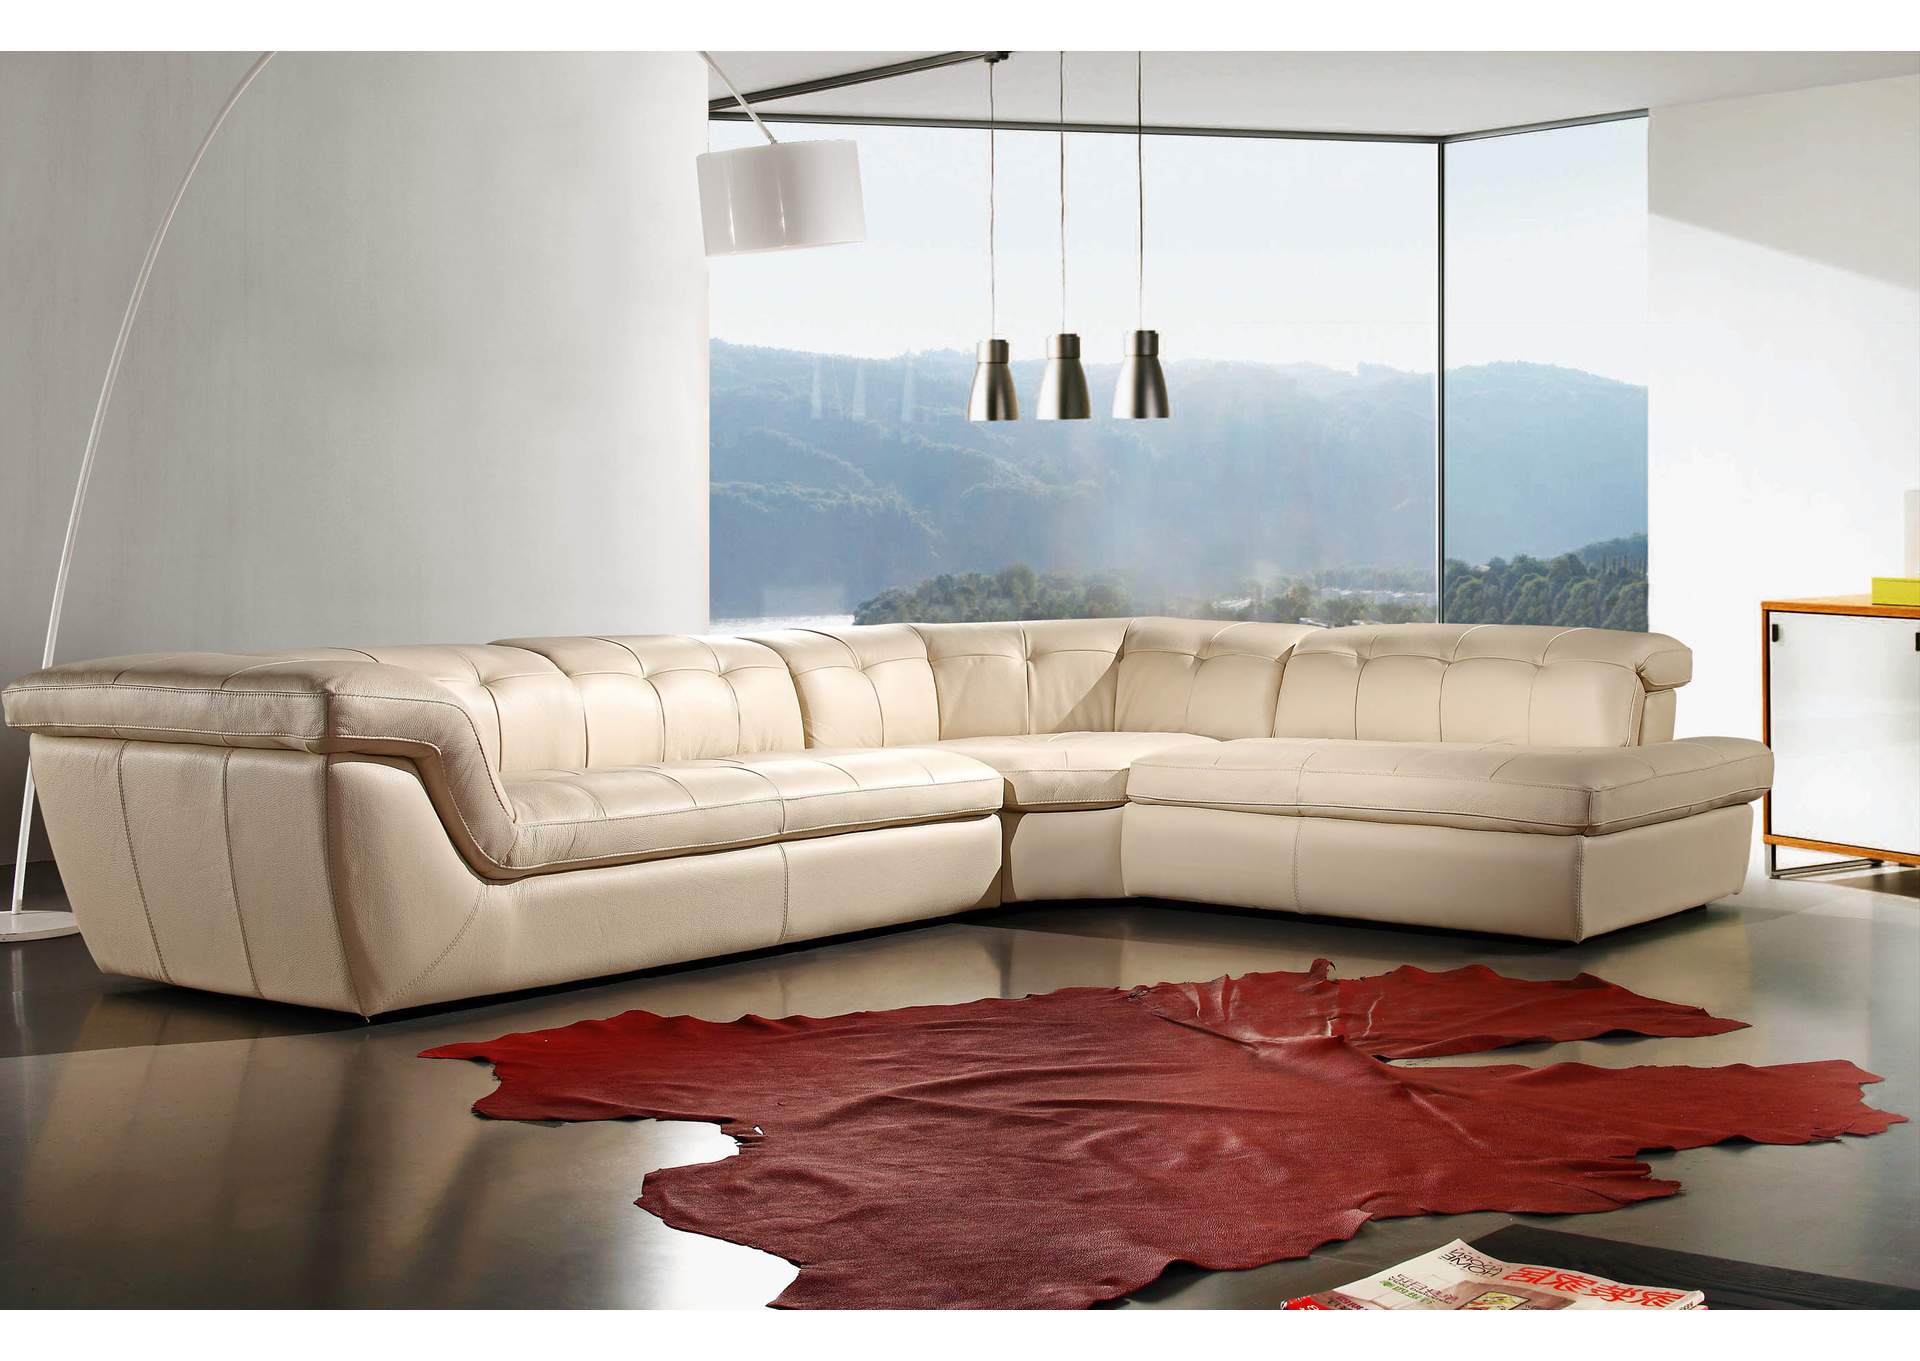 Italian Leather Sectional Beige Color, Italian Sectional Leather Sofa